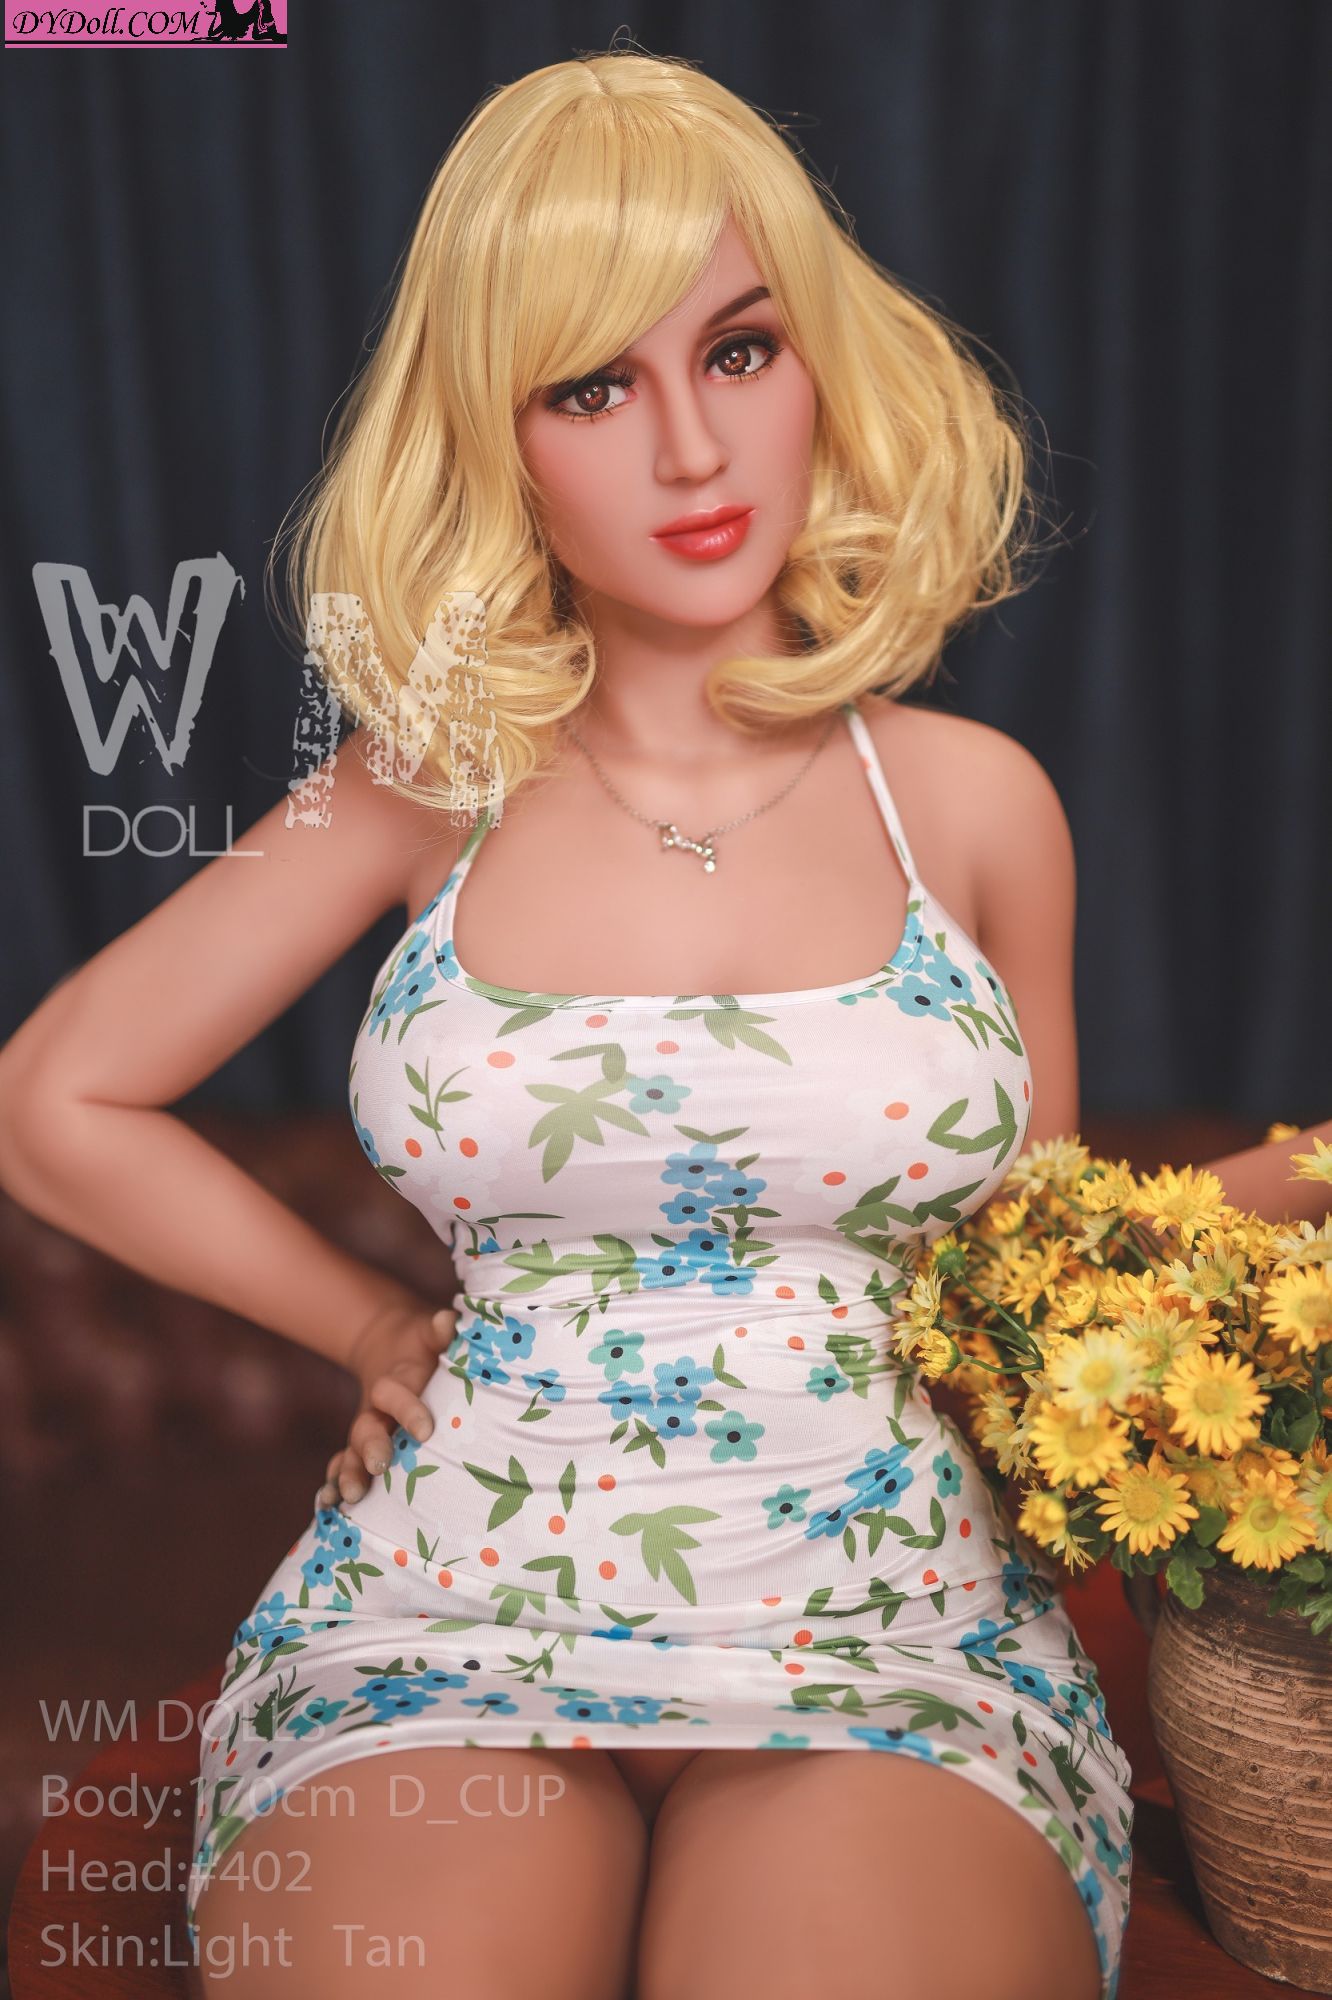 Blonde cute teen sex doll toy with big boobs